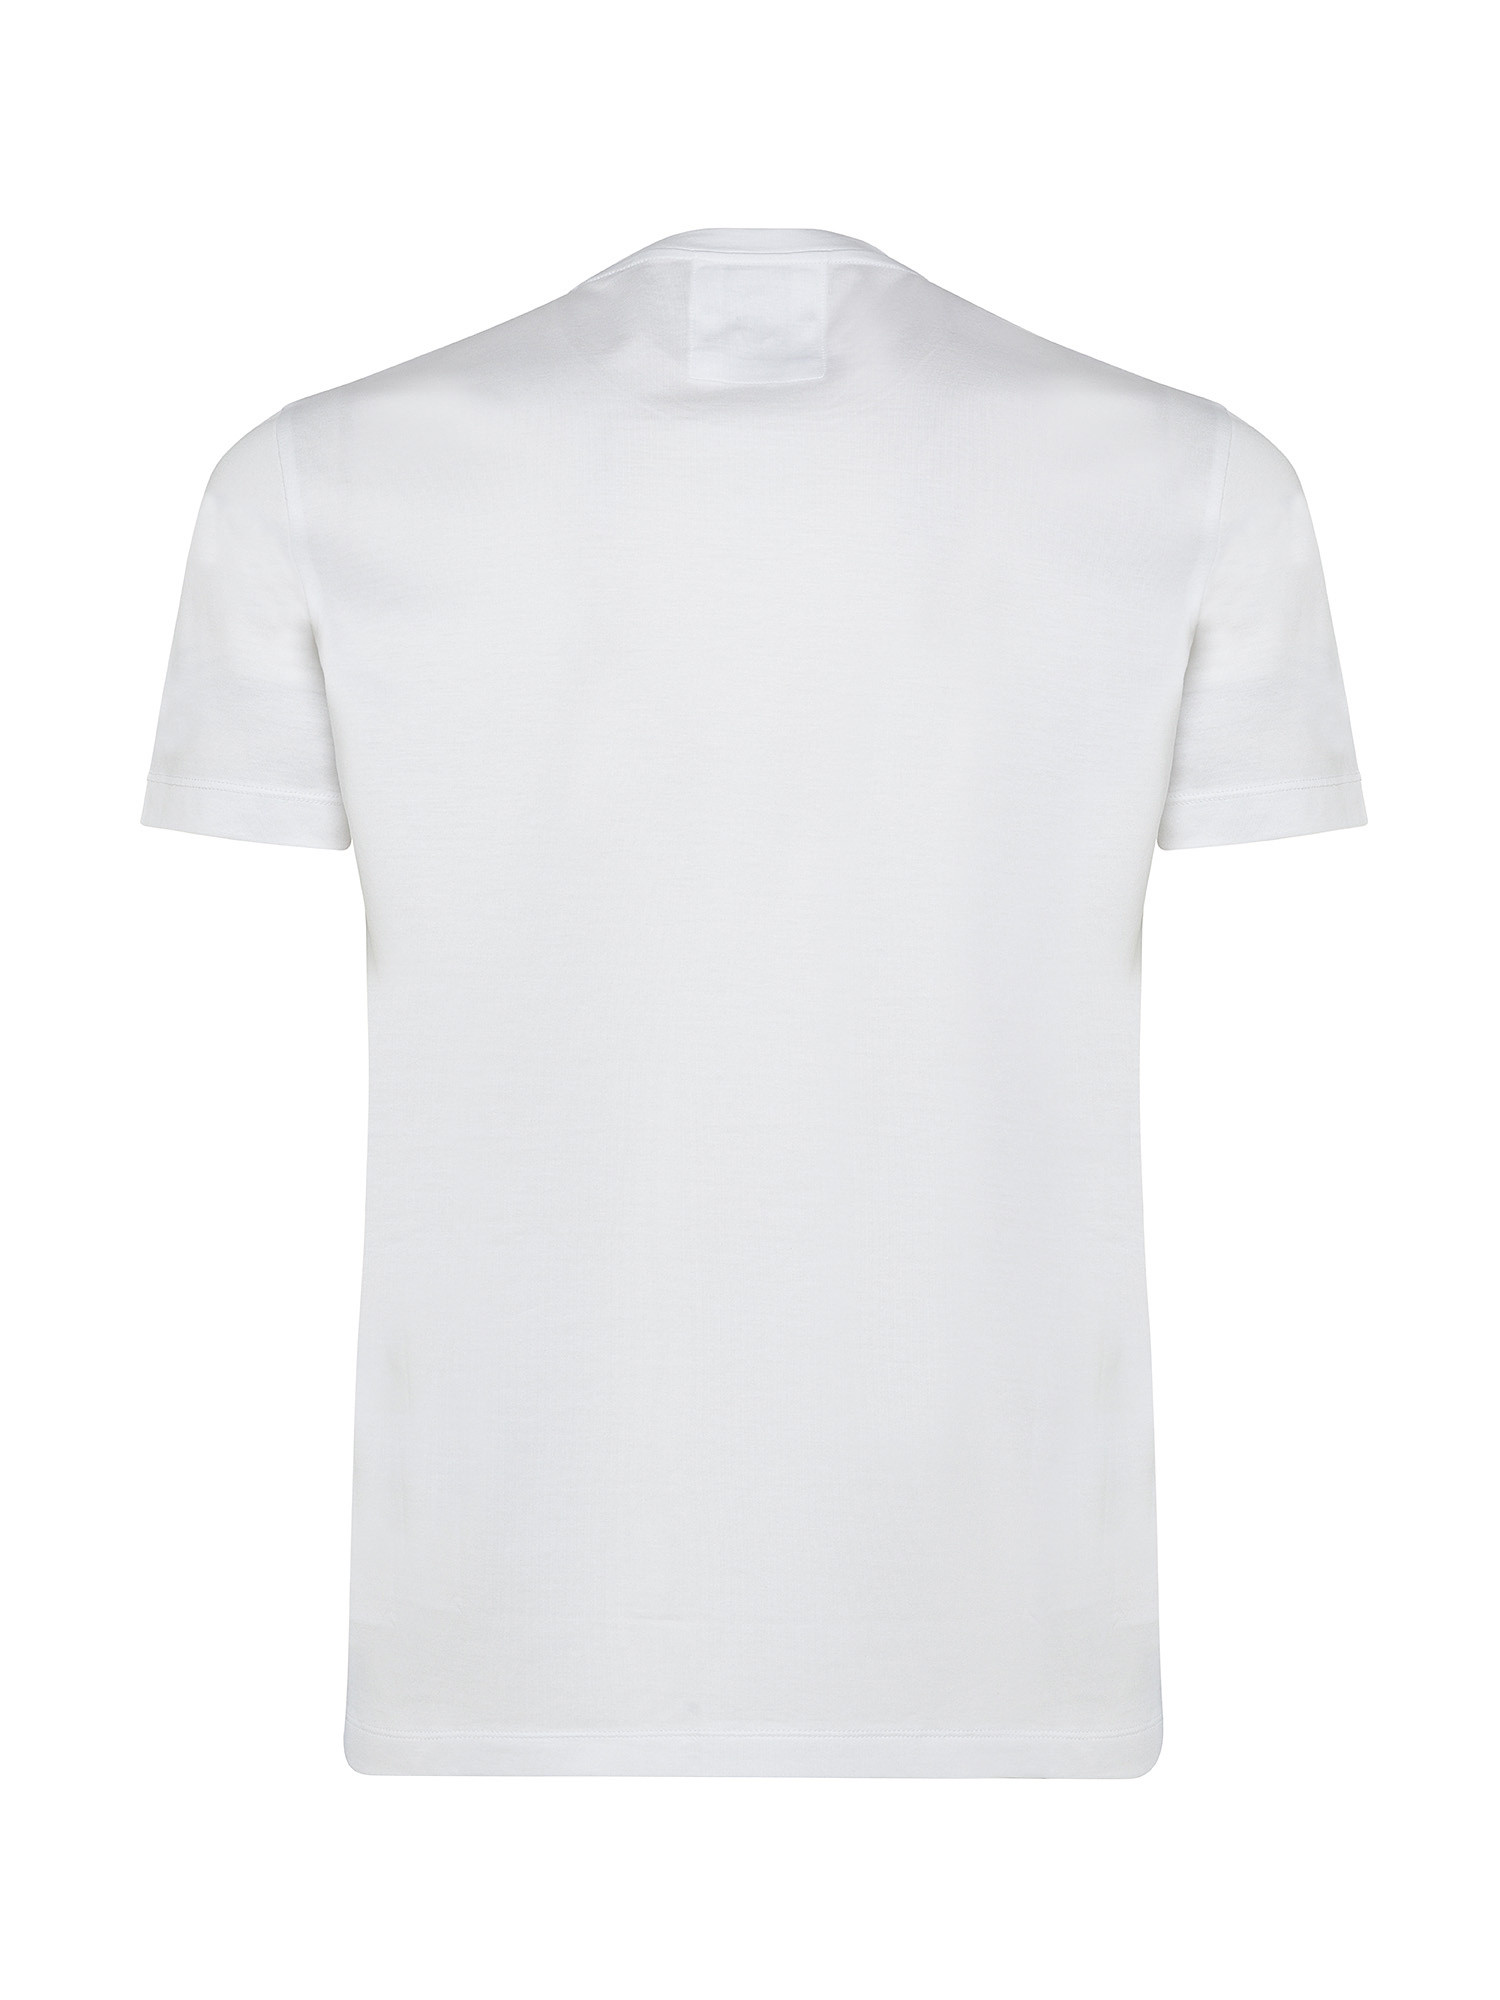 Emporio Armani - T-shirt con logo lettering, Bianco, large image number 1